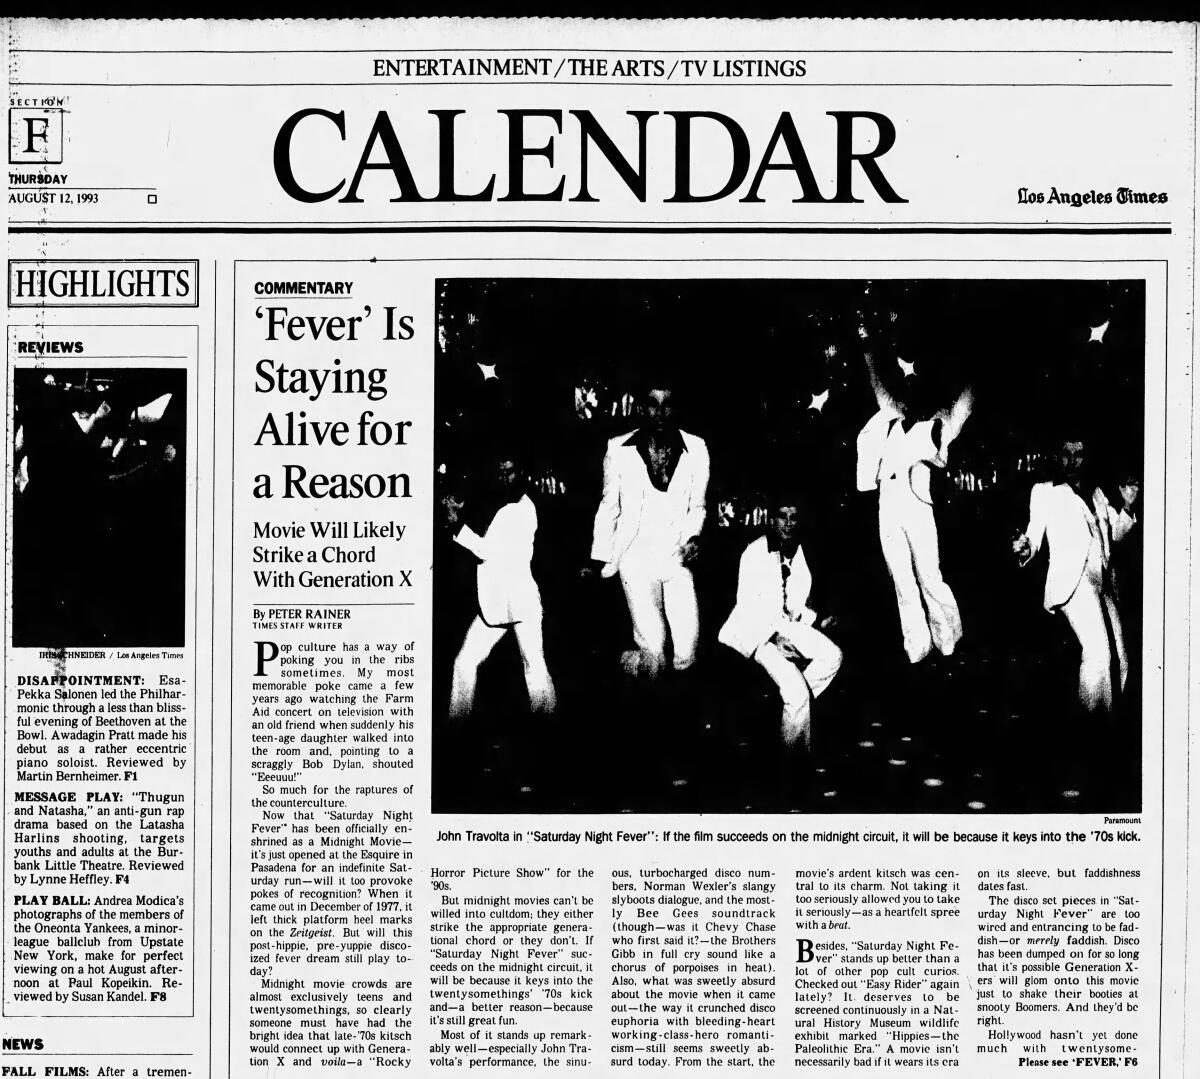 Newspaper clipping from 1993 about the legacy of "Saturday Night Fever"